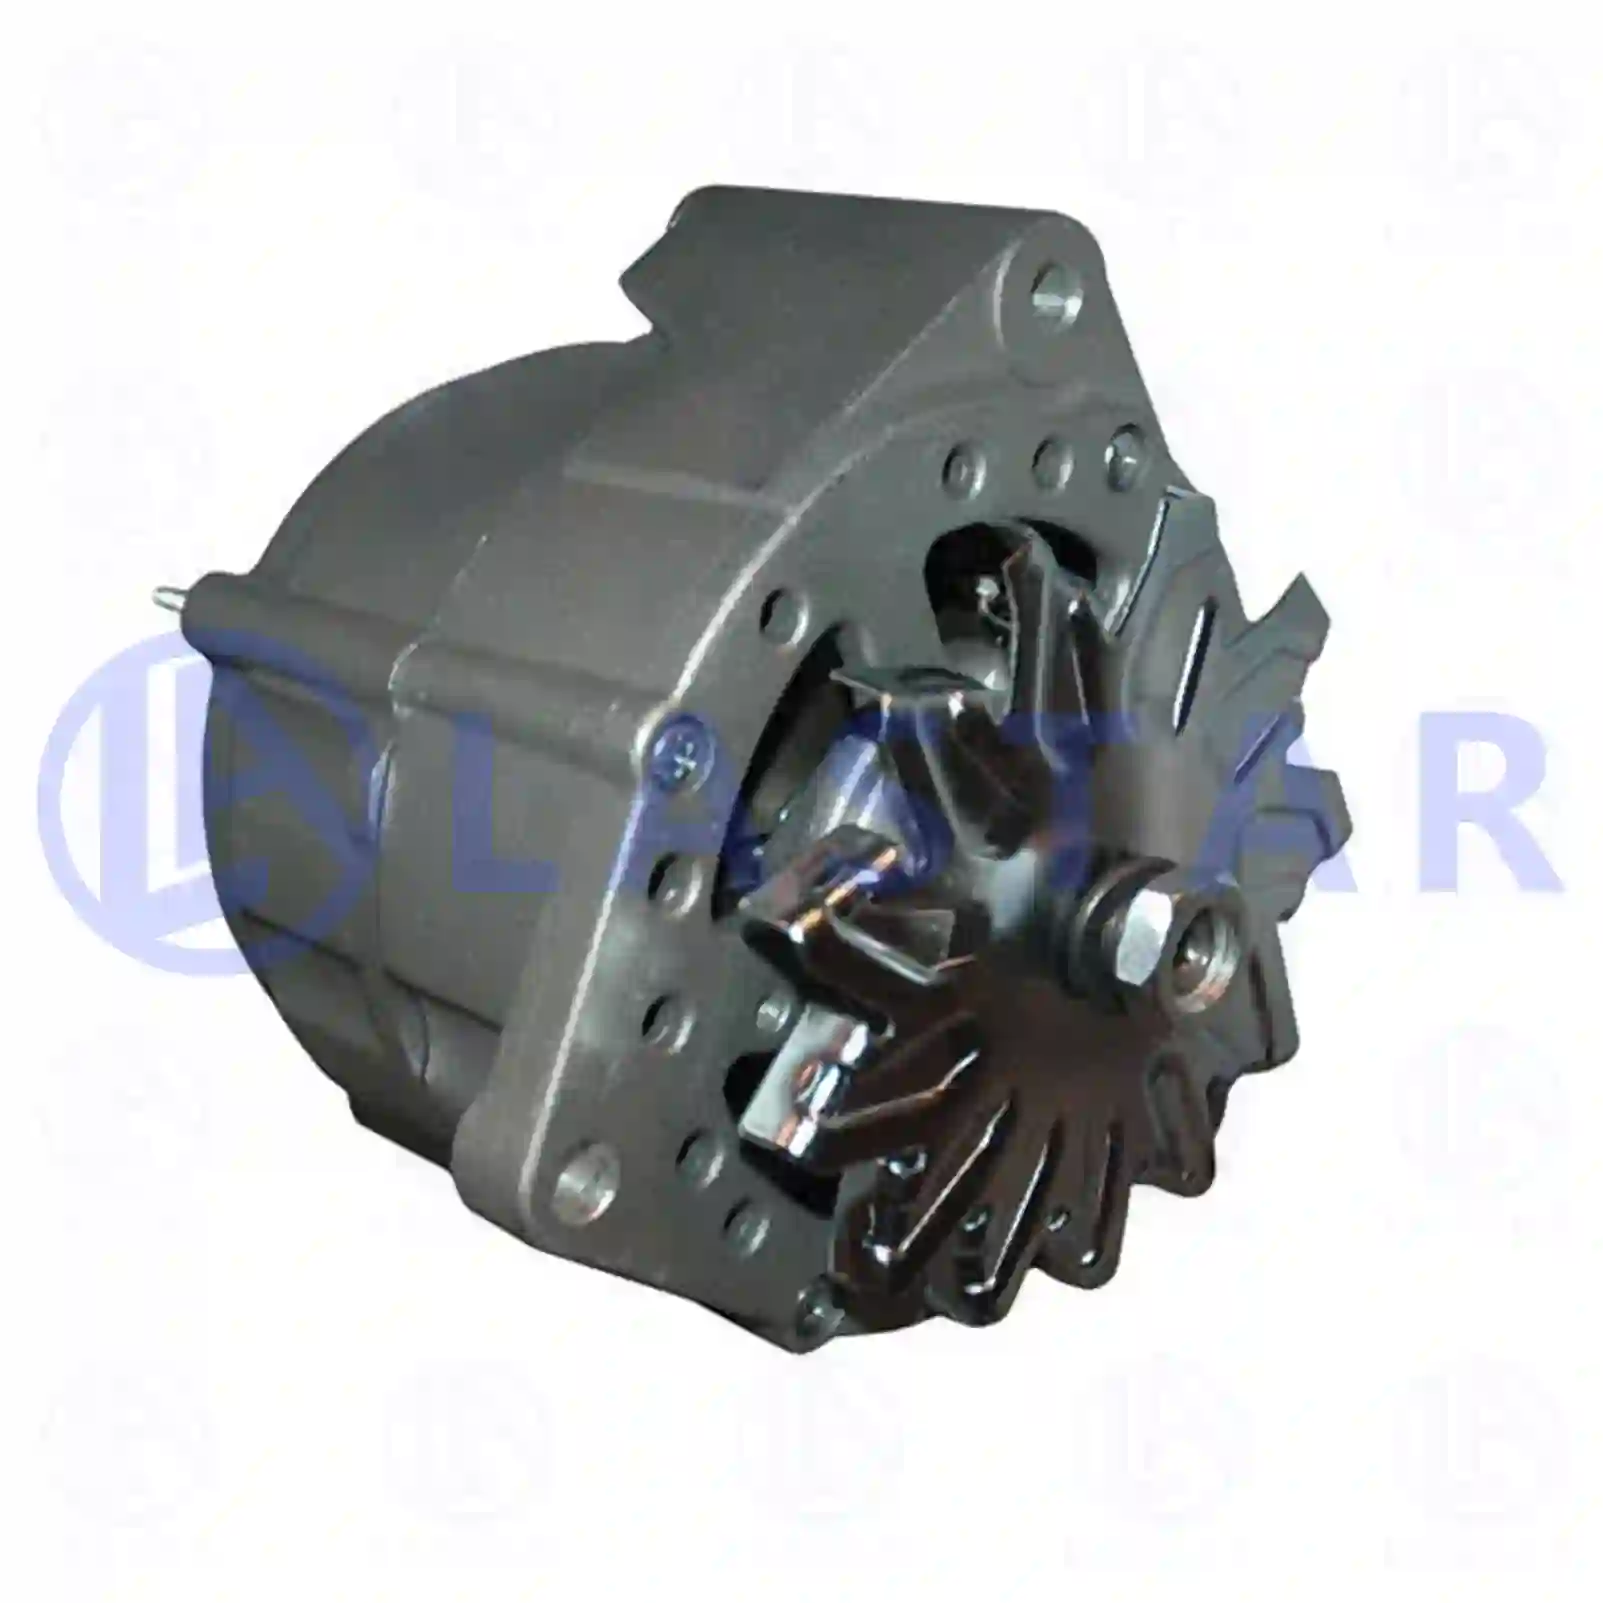 Alternator, without pulley, 77710000, 9019635901, 3255439, 0613097, 0854300, 0890775, 0894300, 1244492, 1244492A, 1244492R, 1274480, 1350515, 1350515A, 1350515R, 1357591, 1357591A, 1357591R, 1357592, 1516560, 1528595, 613097, 613097A, 613097R, 854300, 859232, 890775, 894300, AELD077, AMPC197, 01171461, 03040718, 1702103, 1702113, 9540702, 6002025, 6104058, 51261017119, 51261017123, 51261017144, 51261017184, 51261017185, 51261017201, 51261019123, 51261019144, 51261019185, 51261019201, 51262017185, 51262017201, 81261016018, 81261016027, 88261016001, 51261017201, 0051543402, 0061546802, 0071542702, 0091540702, 009154070280, 009154070287, 0101542002, 3661500750, 3661502050, 3761507050, 0101542002, 7421324000, 7421341000, 7421353000, 894300, ZG20247-0008 ||  77710000 Lastar Spare Part | Truck Spare Parts, Auotomotive Spare Parts Alternator, without pulley, 77710000, 9019635901, 3255439, 0613097, 0854300, 0890775, 0894300, 1244492, 1244492A, 1244492R, 1274480, 1350515, 1350515A, 1350515R, 1357591, 1357591A, 1357591R, 1357592, 1516560, 1528595, 613097, 613097A, 613097R, 854300, 859232, 890775, 894300, AELD077, AMPC197, 01171461, 03040718, 1702103, 1702113, 9540702, 6002025, 6104058, 51261017119, 51261017123, 51261017144, 51261017184, 51261017185, 51261017201, 51261019123, 51261019144, 51261019185, 51261019201, 51262017185, 51262017201, 81261016018, 81261016027, 88261016001, 51261017201, 0051543402, 0061546802, 0071542702, 0091540702, 009154070280, 009154070287, 0101542002, 3661500750, 3661502050, 3761507050, 0101542002, 7421324000, 7421341000, 7421353000, 894300, ZG20247-0008 ||  77710000 Lastar Spare Part | Truck Spare Parts, Auotomotive Spare Parts